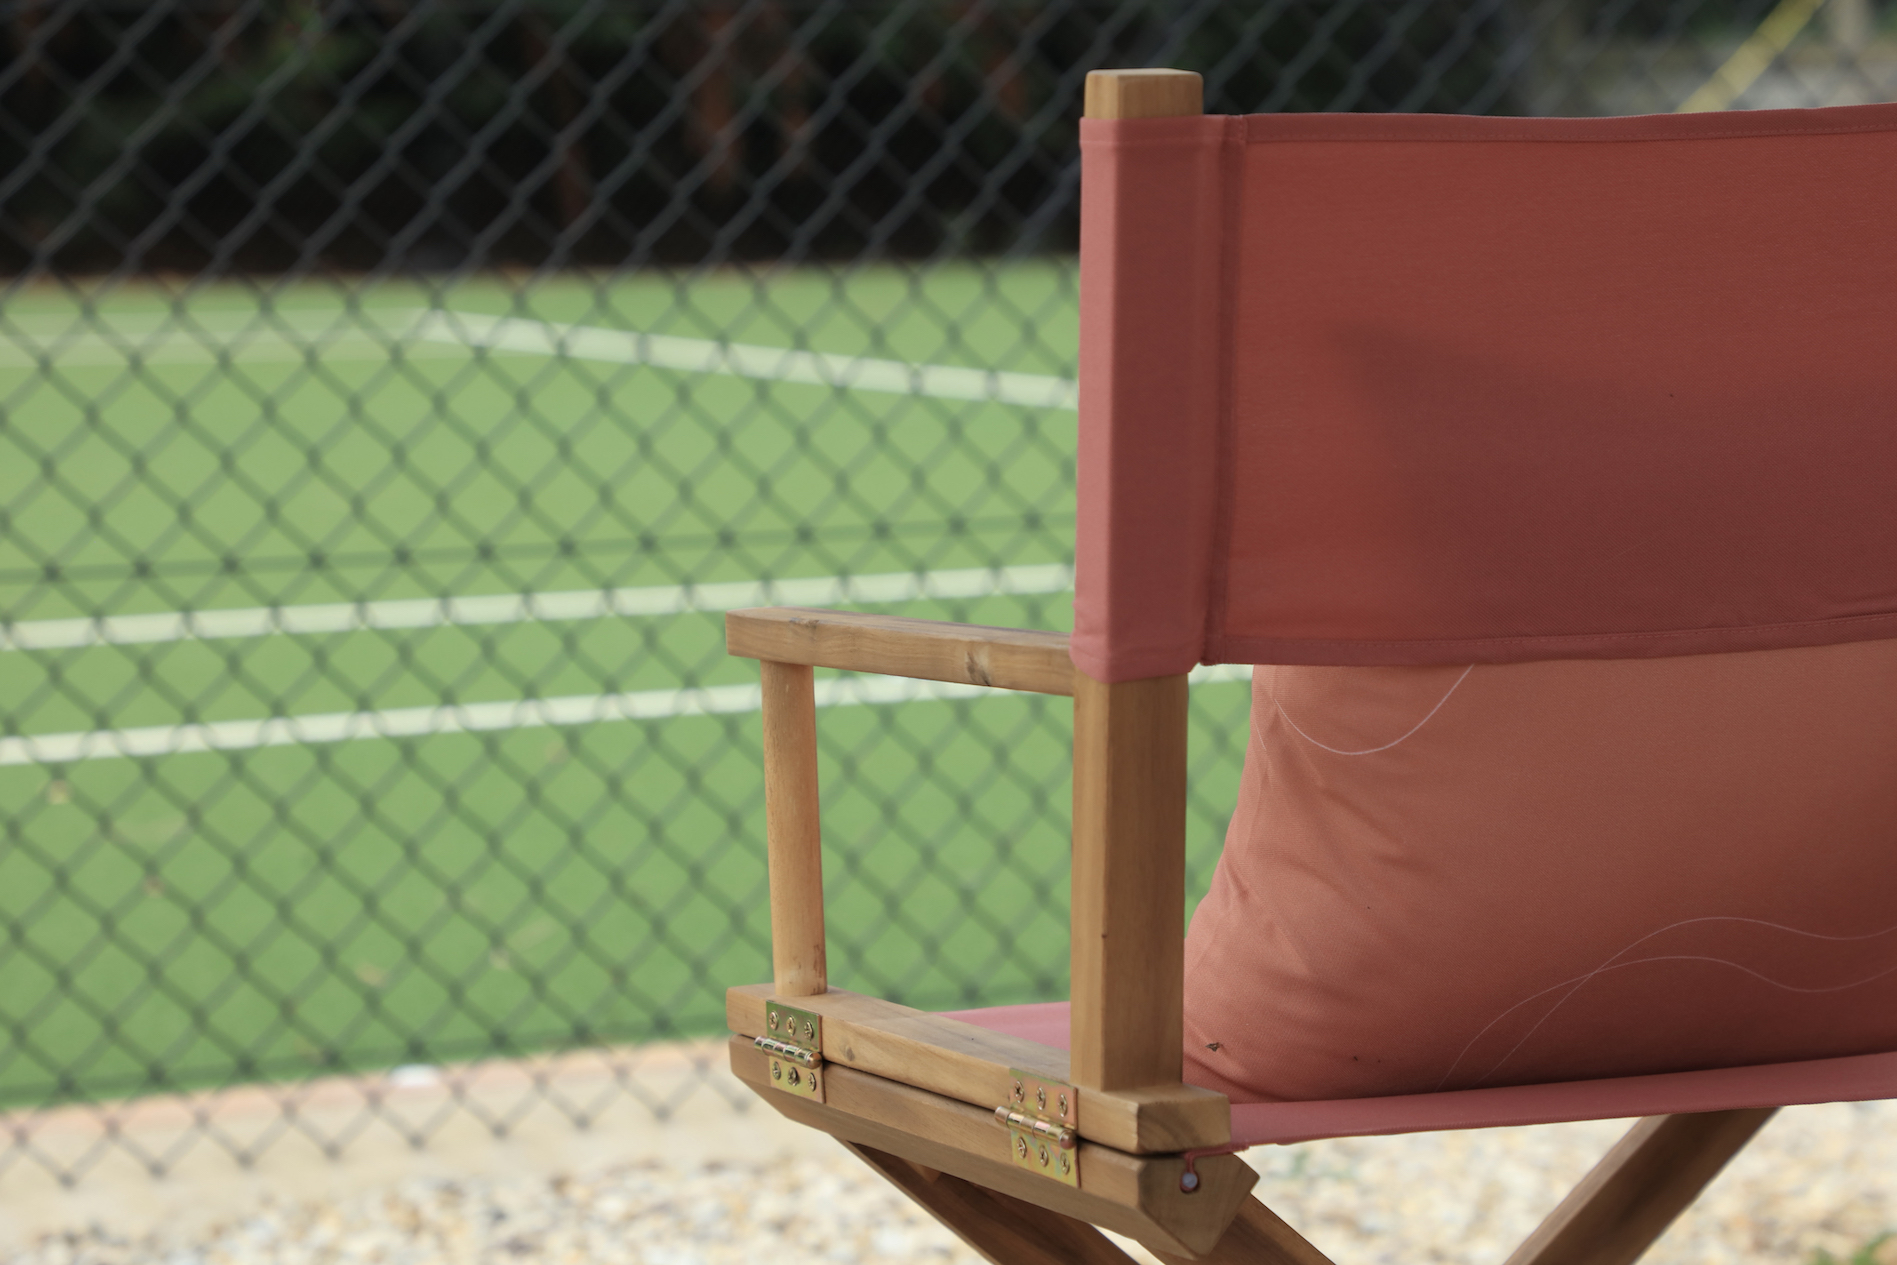 Terracotta director chairs at sibford park tennis pavilion 